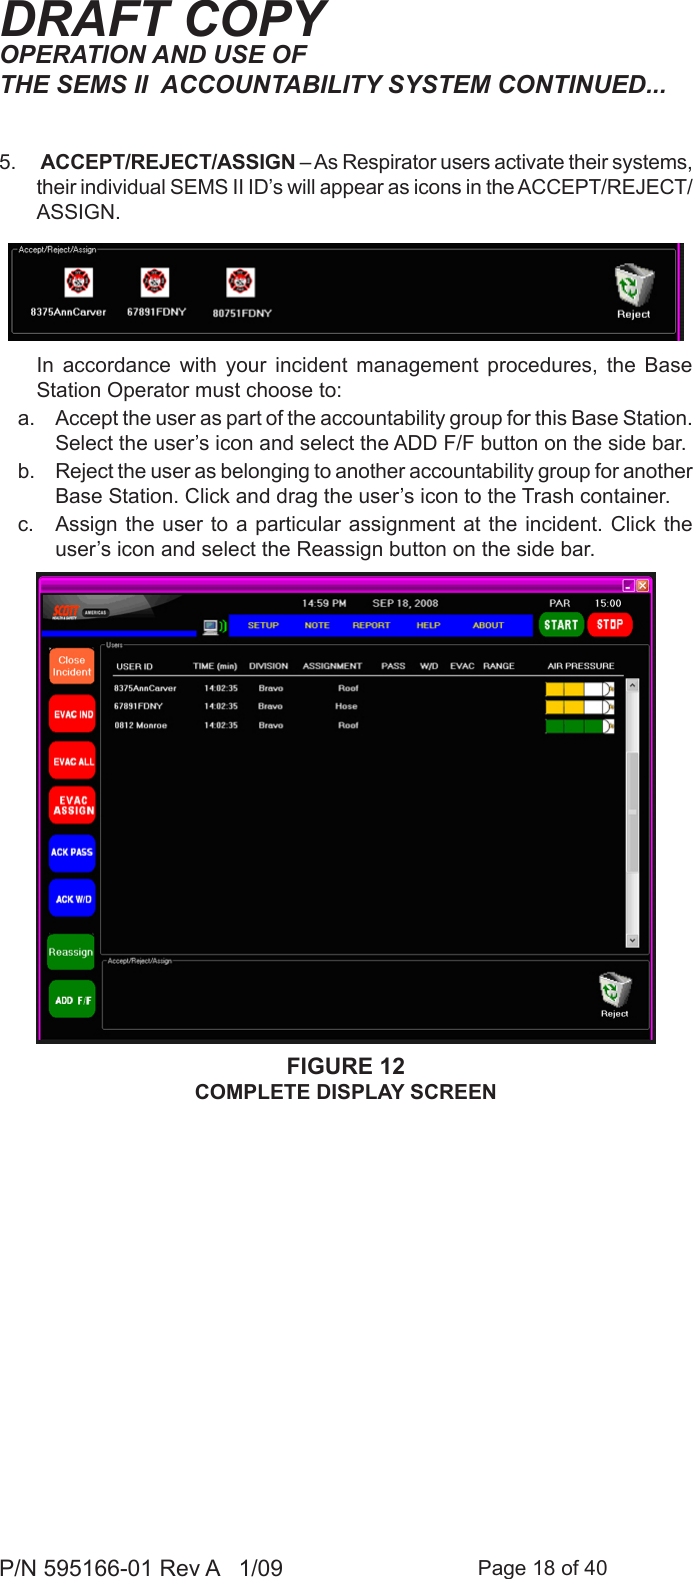 Page 18 of 40P/N 595166-01 Rev A   1/09DRAFT COPY5.   ACCEPT/REJECT/ASSIGN – As Respirator users activate their systems, their individual SEMS II ID’s will appear as icons in the ACCEPT/REJECT/ASSIGN.   In  accordance  with  your  incident  management  procedures,  the  Base Station Operator must choose to:a.  Accept the user as part of the accountability group for this Base Station. Select the user’s icon and select the ADD F/F button on the side bar. b.  Reject the user as belonging to another accountability group for another Base Station. Click and drag the user’s icon to the Trash container. c.  Assign the user  to a particular assignment  at the incident.  Click the user’s icon and select the Reassign button on the side bar.FIGURE 12COMPLETE DISPLAY SCREENOPERATION AND USE OF THE SEMS II  ACCOUNTABILITY SYSTEM CONTINUED...